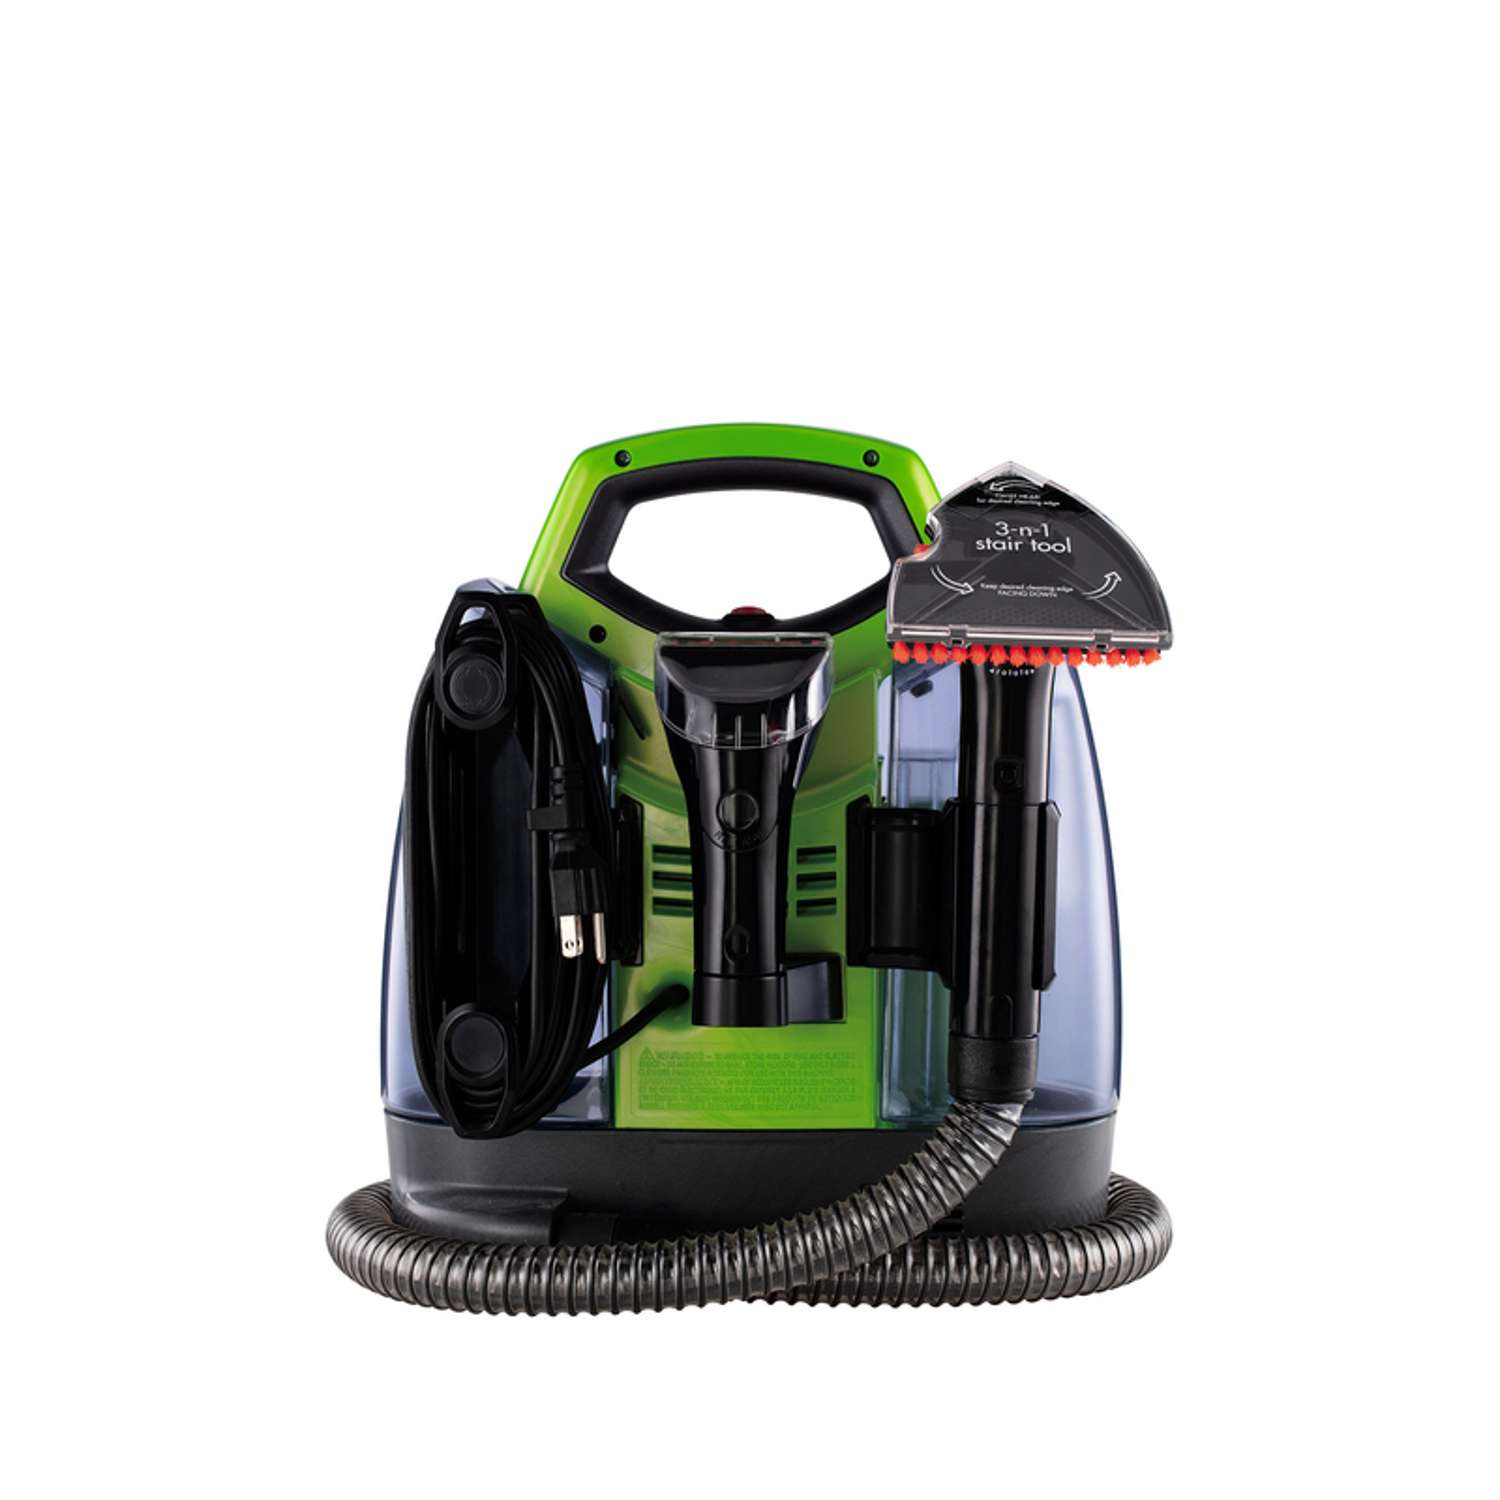 How to Use Bissell Little Green Machine Capet Cleaner 